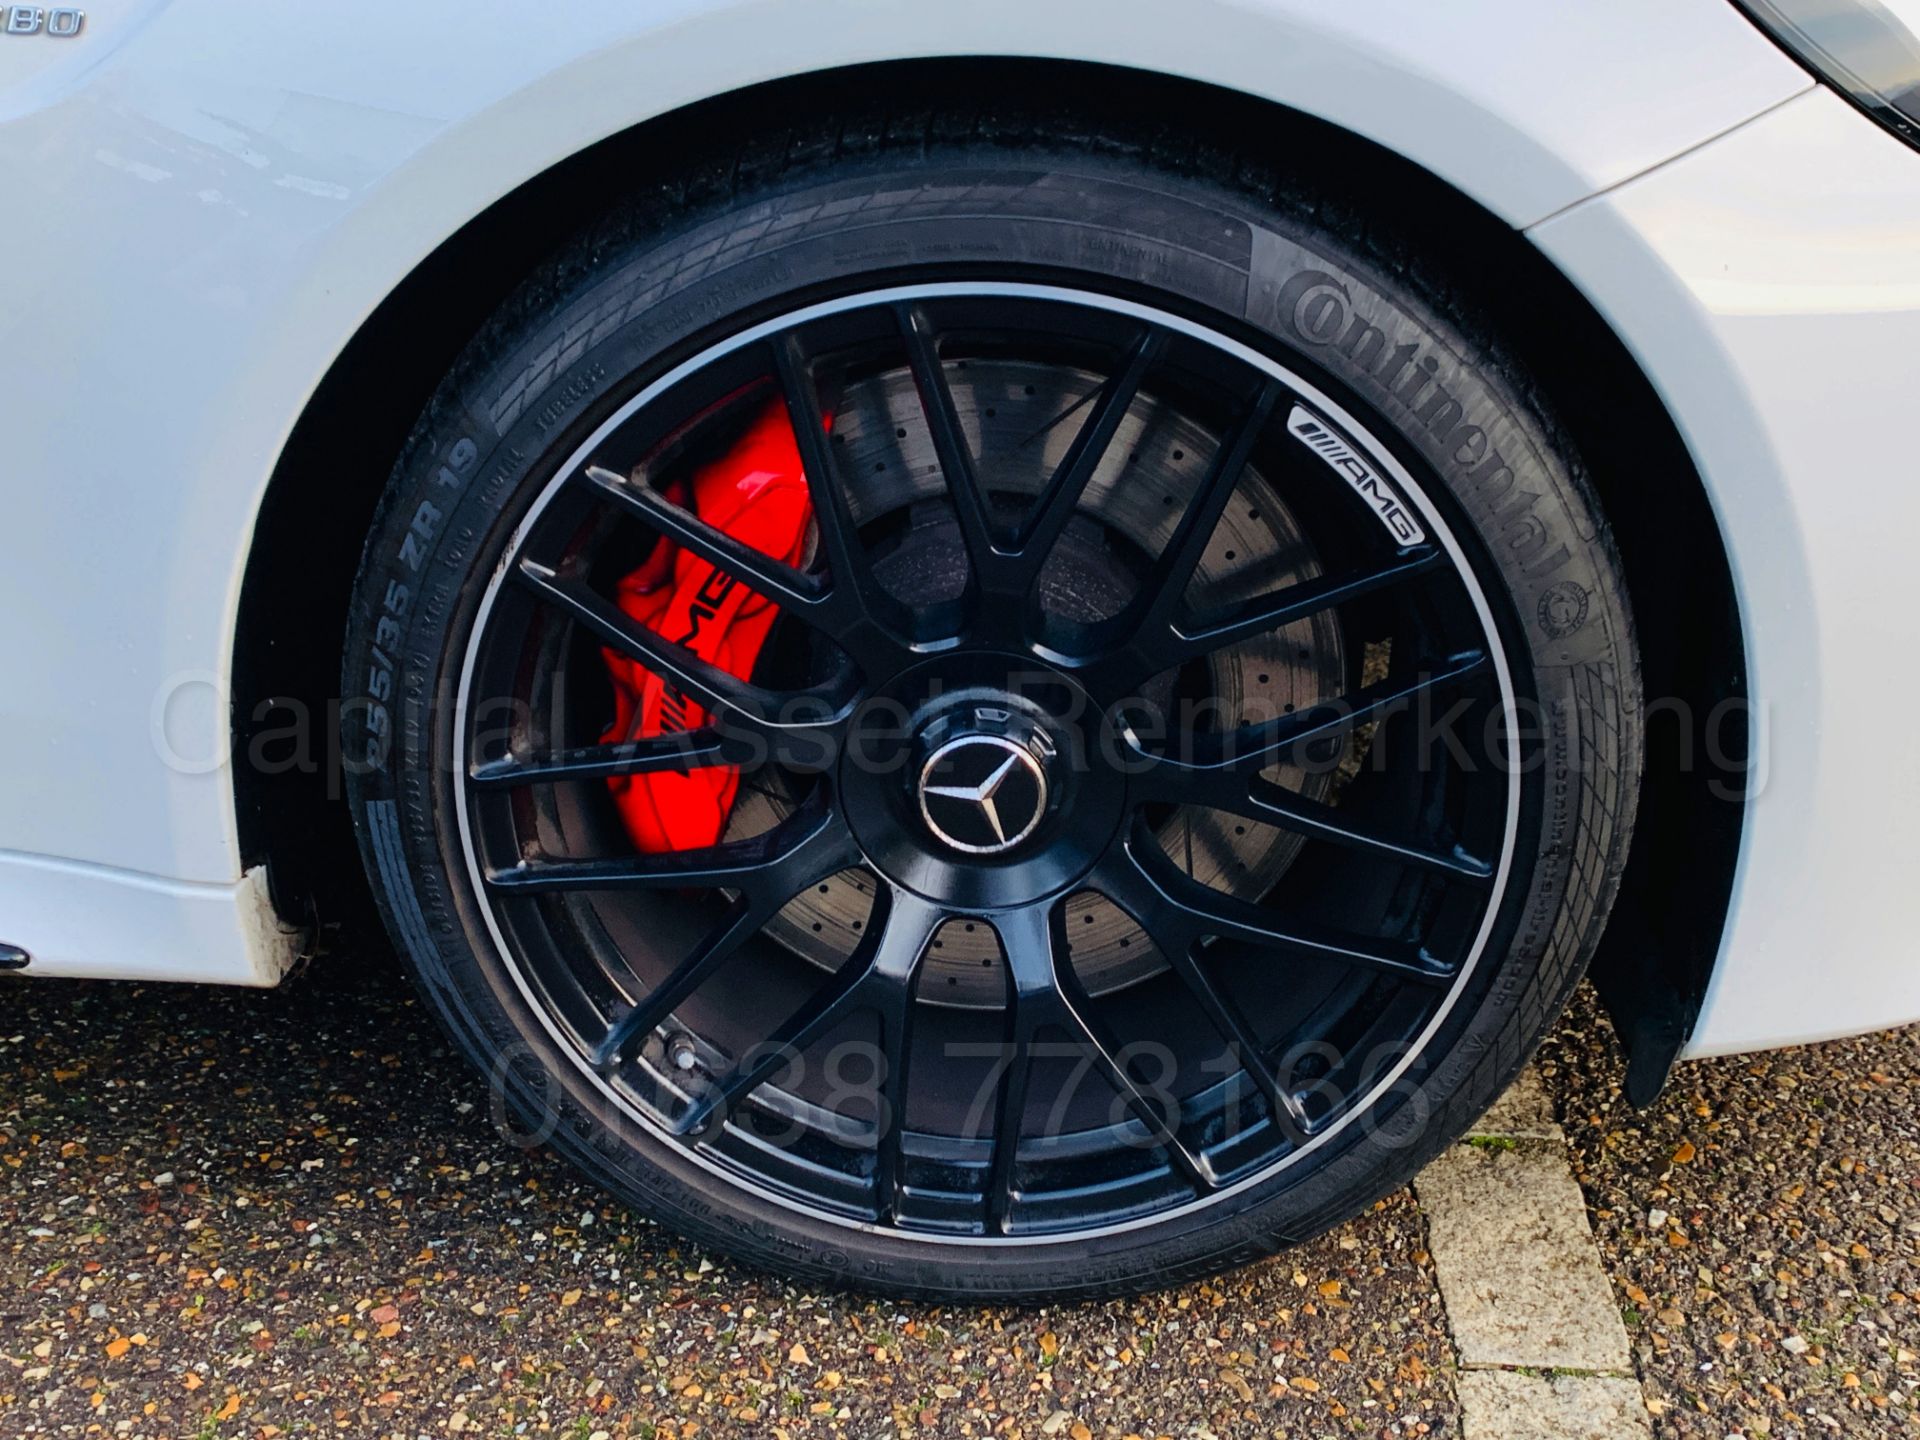 (On Sale) MERCEDES-BENZ AMG C63-S *CABRIOLET* (67 REG) '4.0 BI-TURBO -510 BHP - AUTO' *FULLY LOADED* - Image 37 of 79